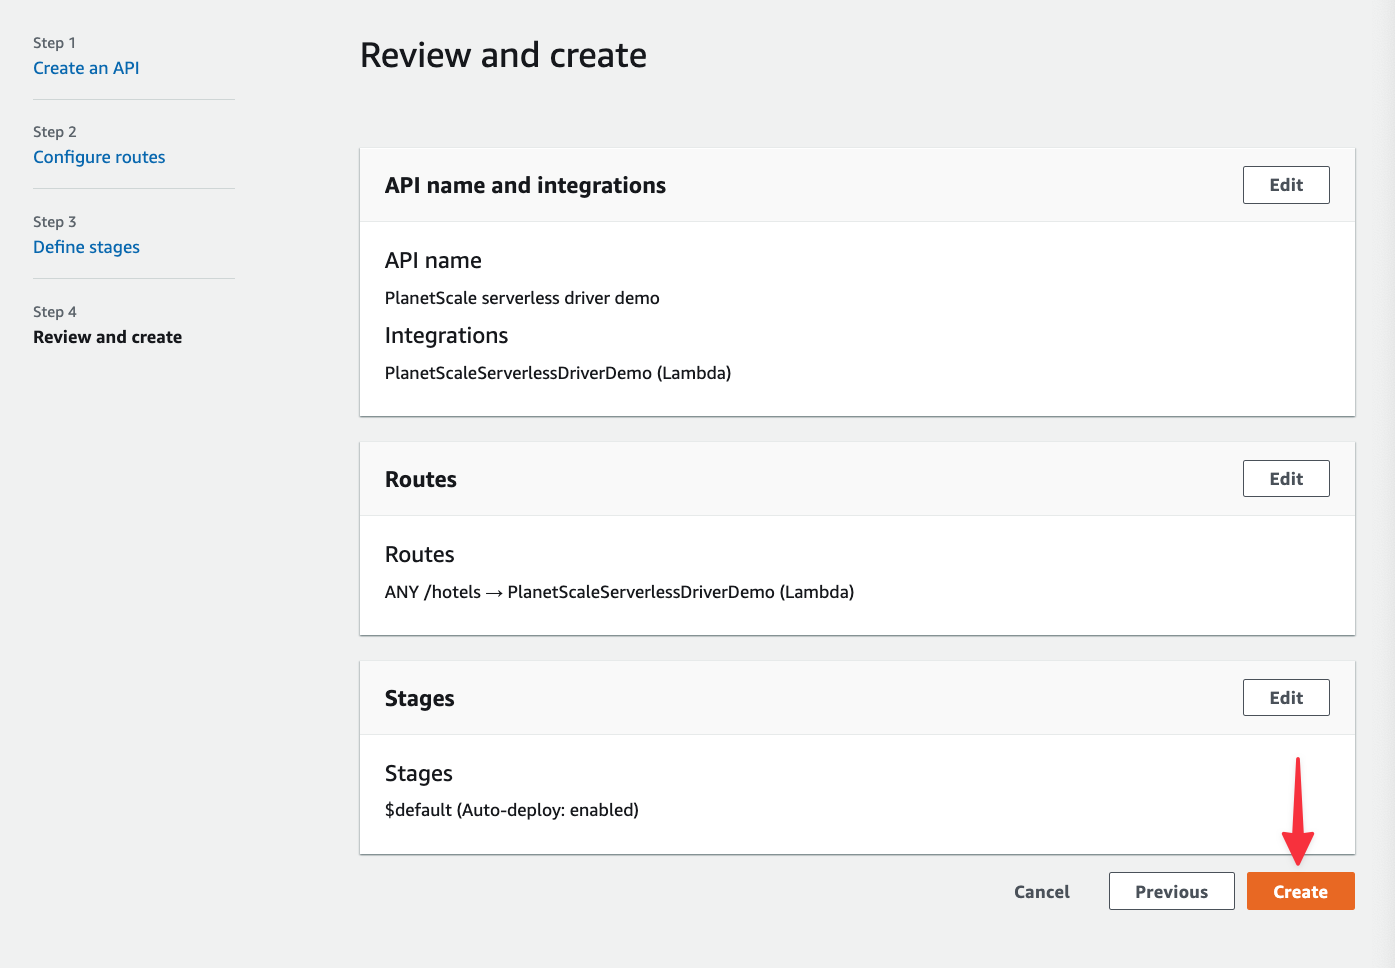 The Review and create step of the Create API process.